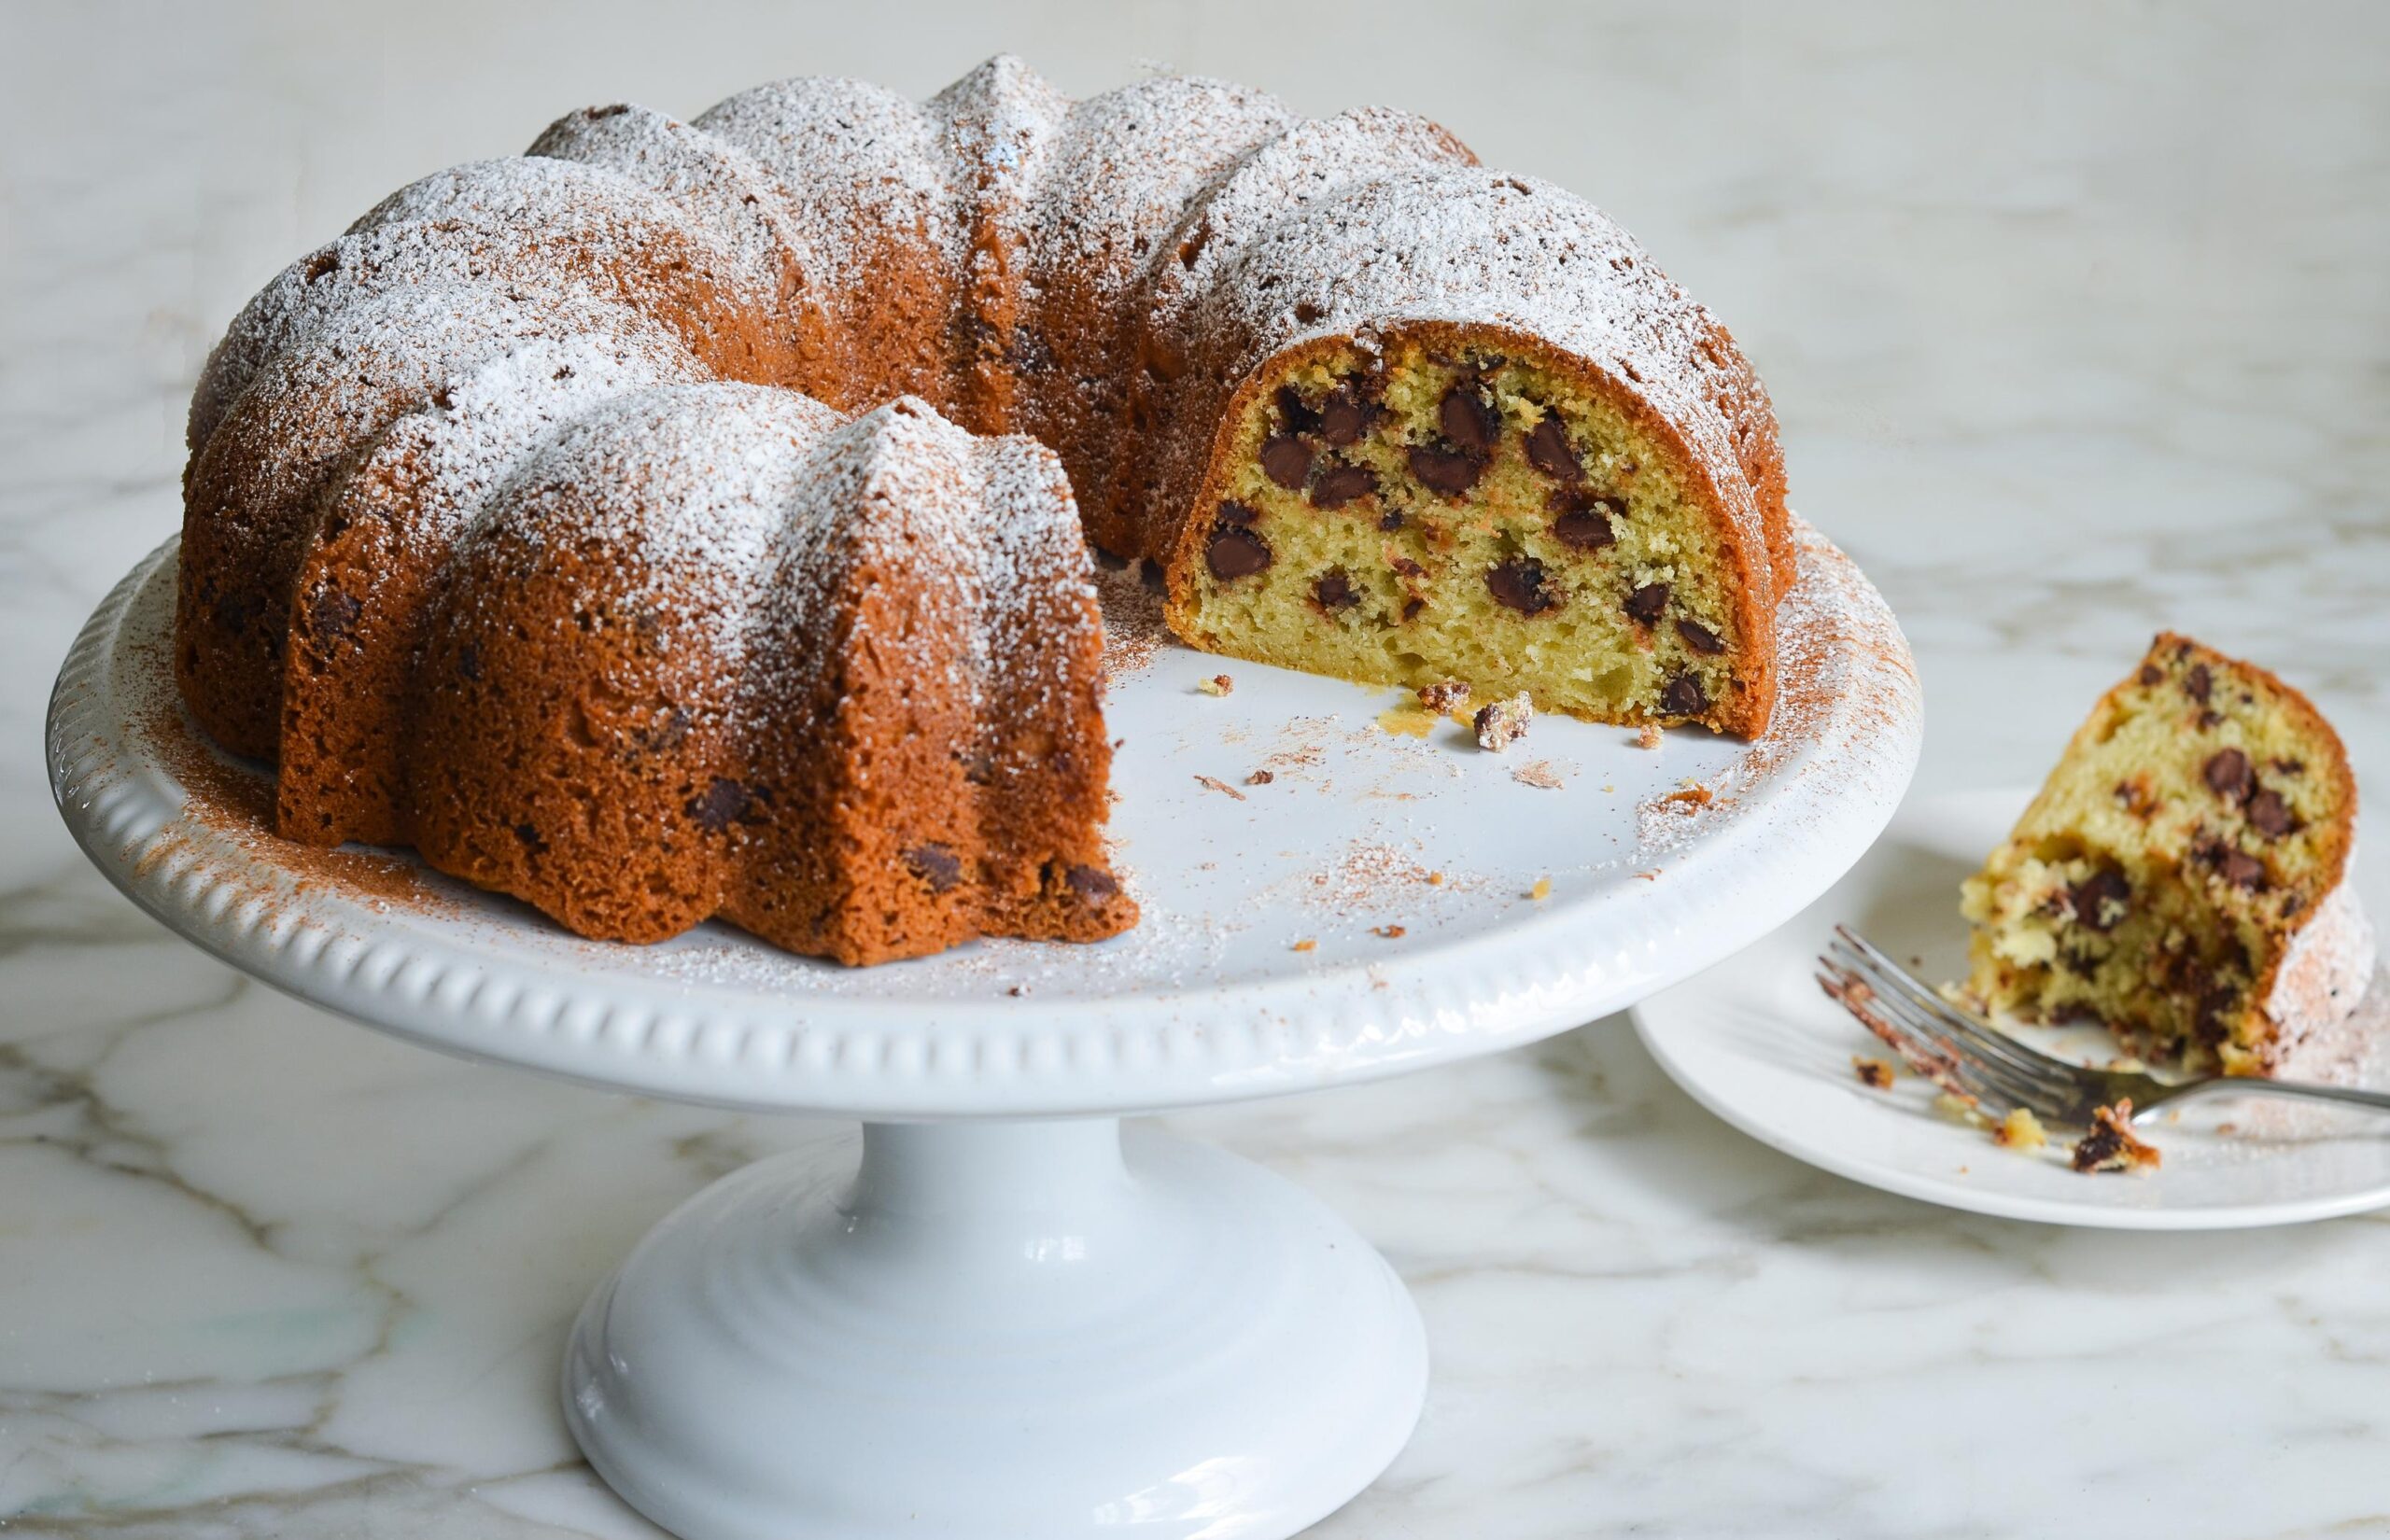  A mouthwatering view of this Bundt Cake’s gooey chocolate chips